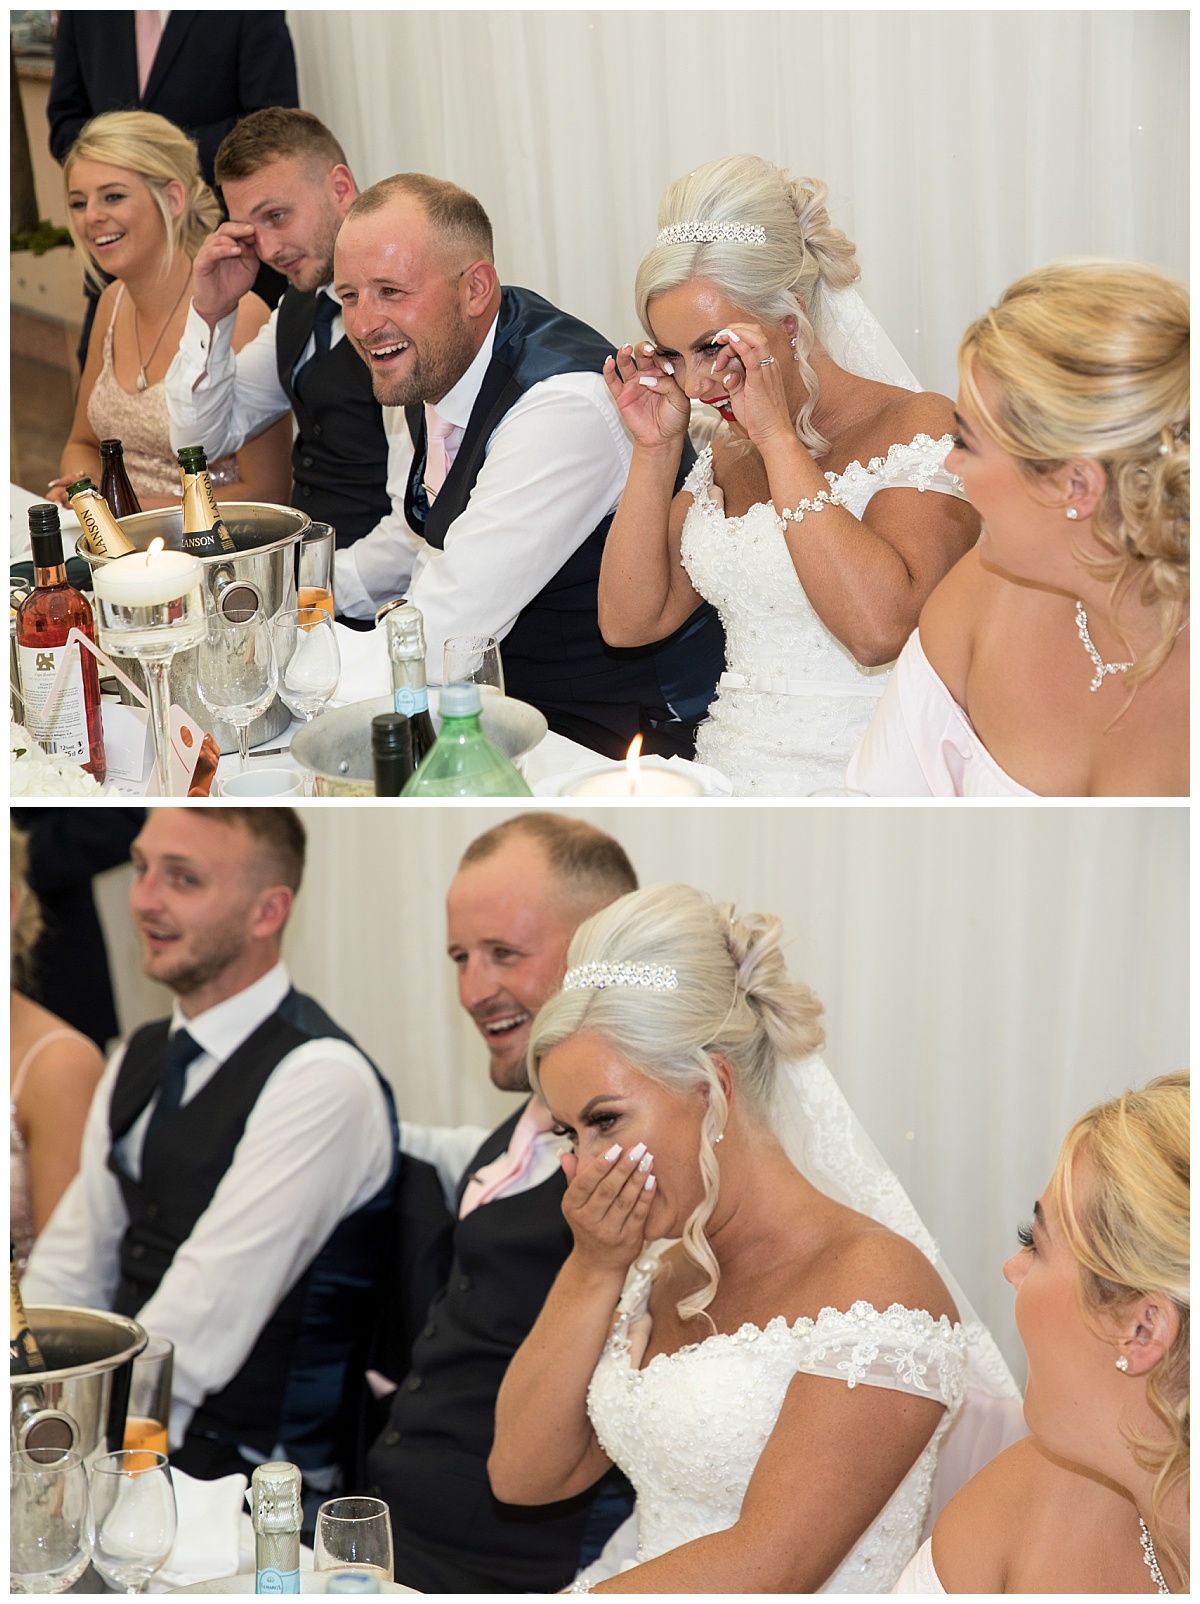 Wedding Photography Manchester - Paula and Daves Mere Court Hotel Wedding 65